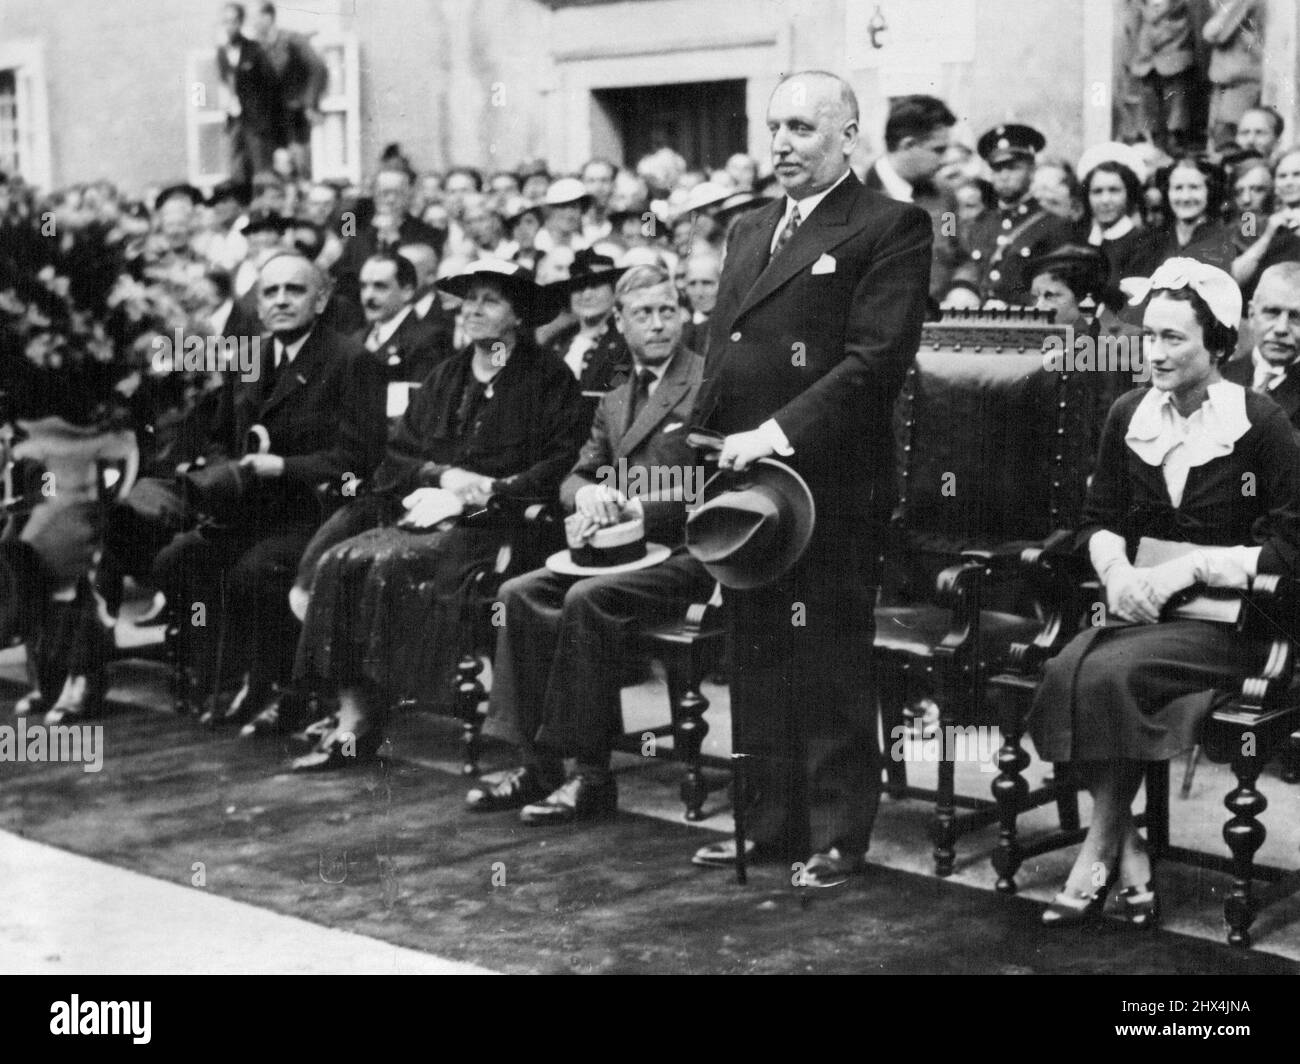 Duke And Duchess of Windsor At Austrian Sports Meeting. Photo Shows:- President Miklas Speaking at the Opening of the sports week. On either side of him are the Duke and Duchess of Windsor. The Duke and Duchess of Windsor made their first official public appearance together when they accompanied President Miklas at the Opening of Worthersee Sports Week, near Castle Wasserleonburg, Austria, during the Week-end. July 13, 1937. (Photo by Topical Press) Stock Photo